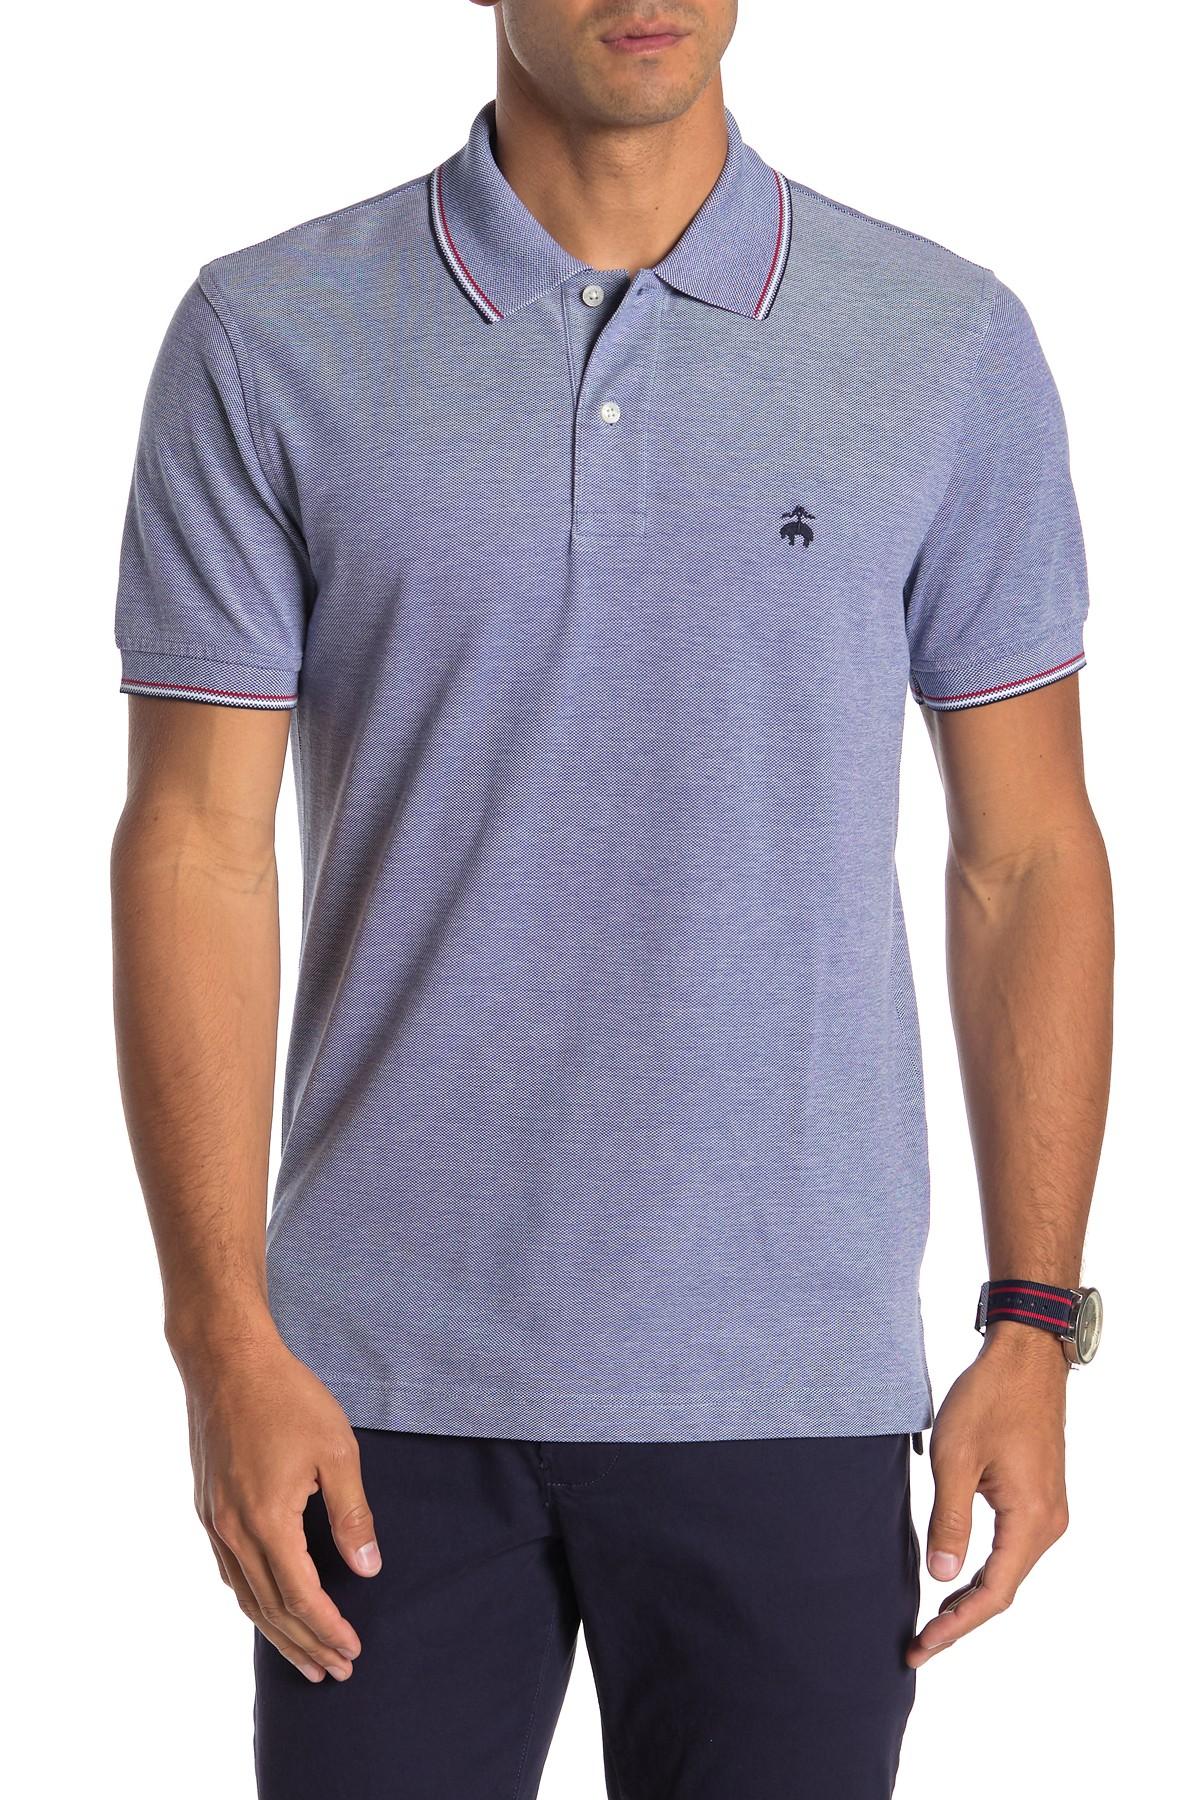 Brooks Brothers Cotton Tipped Pique Knit Polo Shirt in Blue for Men - Lyst